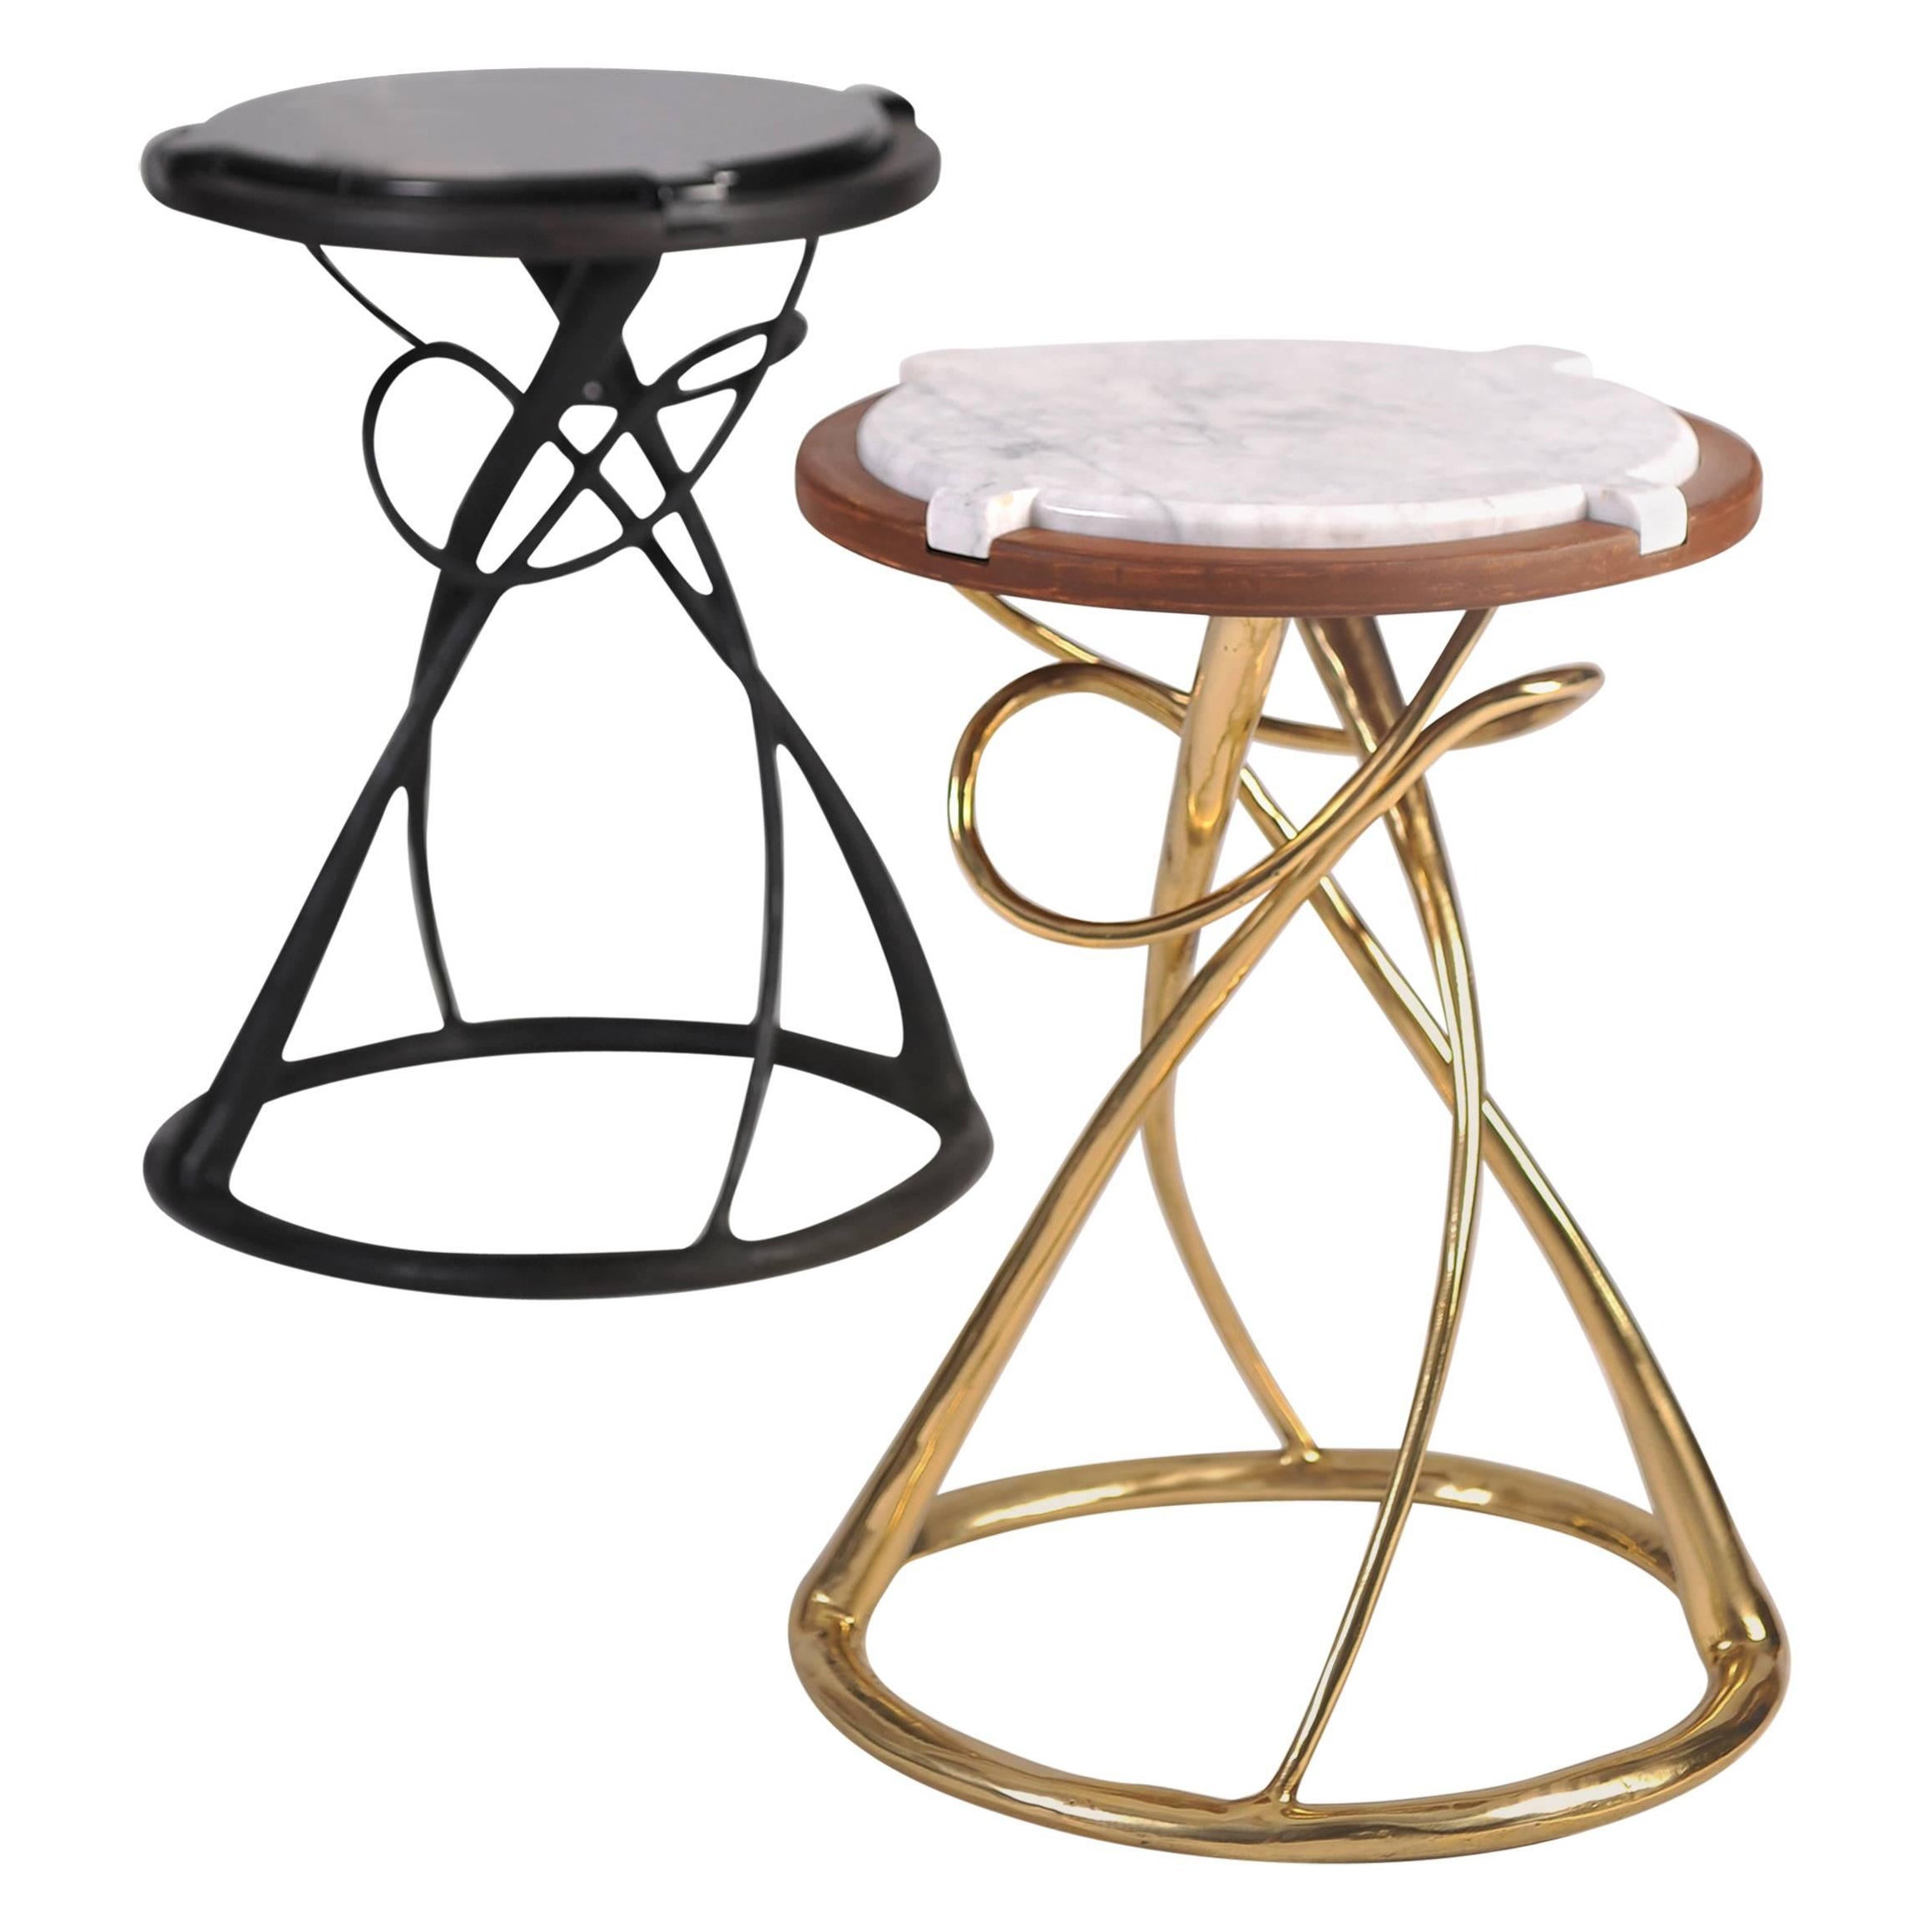 Pair of Brass Side Tables, Hourglass, Misaya